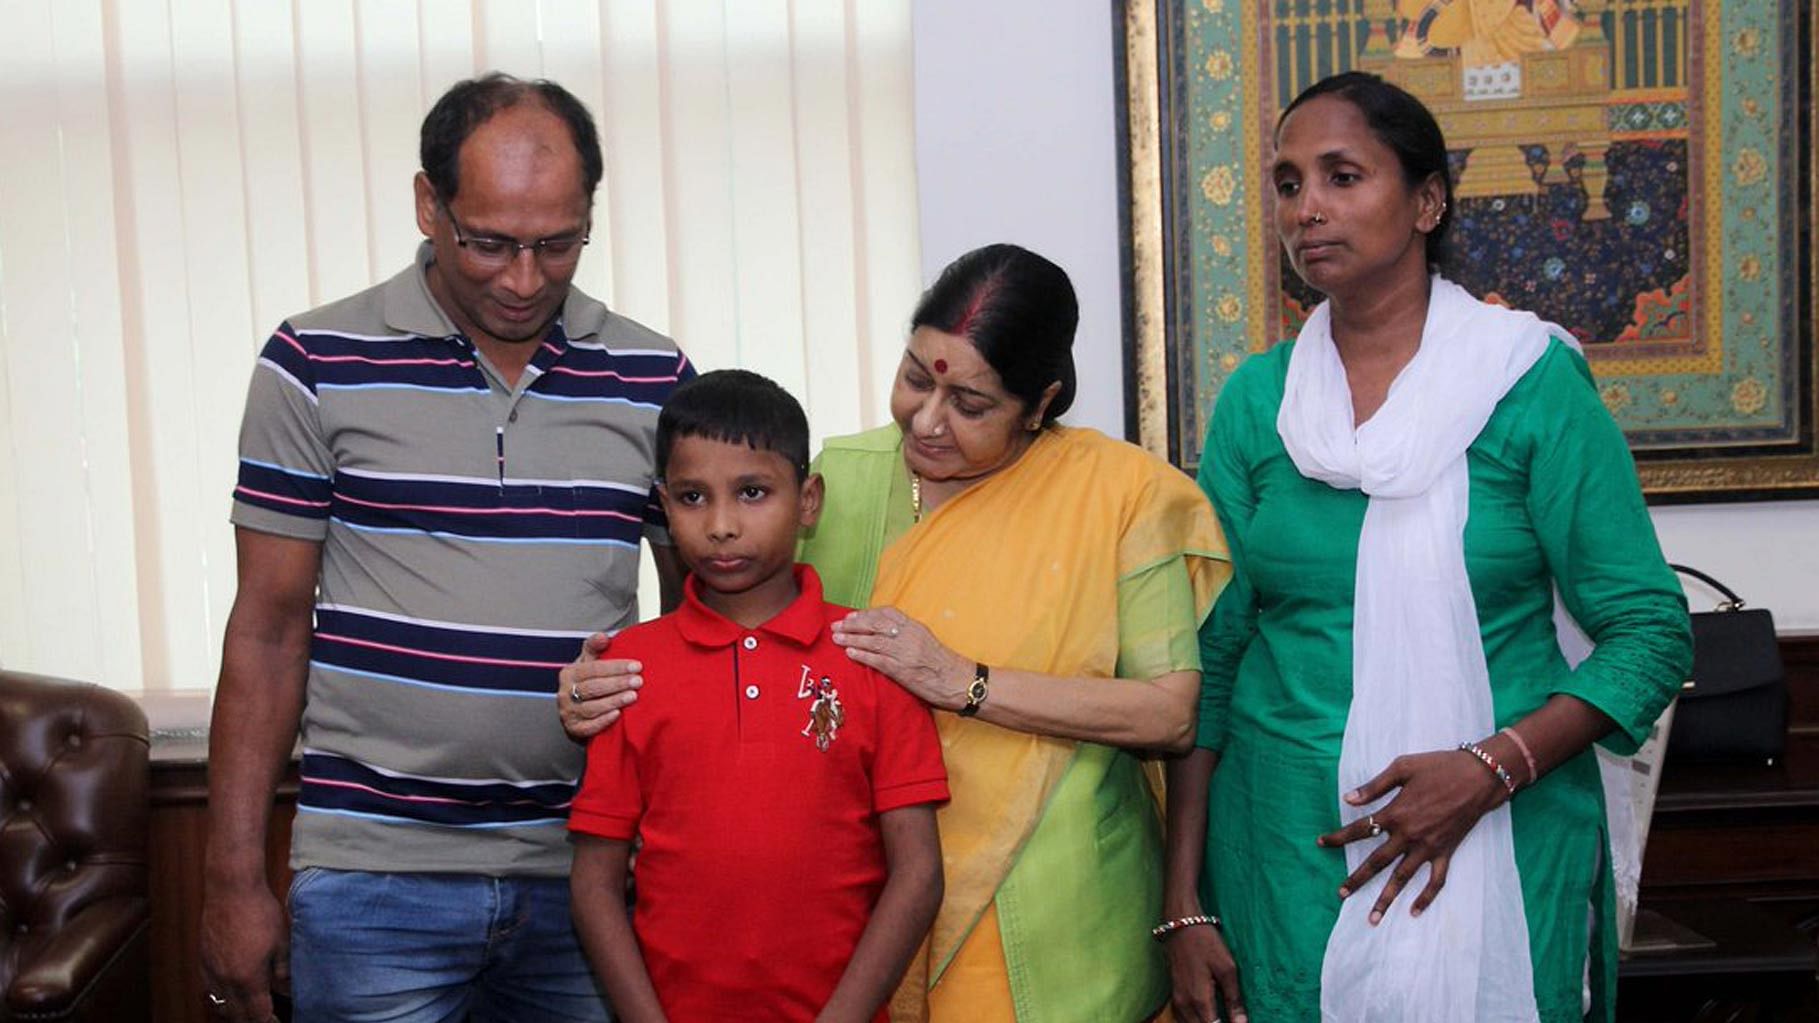 Sonu (6) with parents and External Affairs Minister Sushma Swaraj (center) in Delhi on Thursday, 30 June 2016. (Photo Courtesy: <a href="https://twitter.com/MEAIndia/status/748446952665276416">Twitter.com/@MEAIndia</a>)